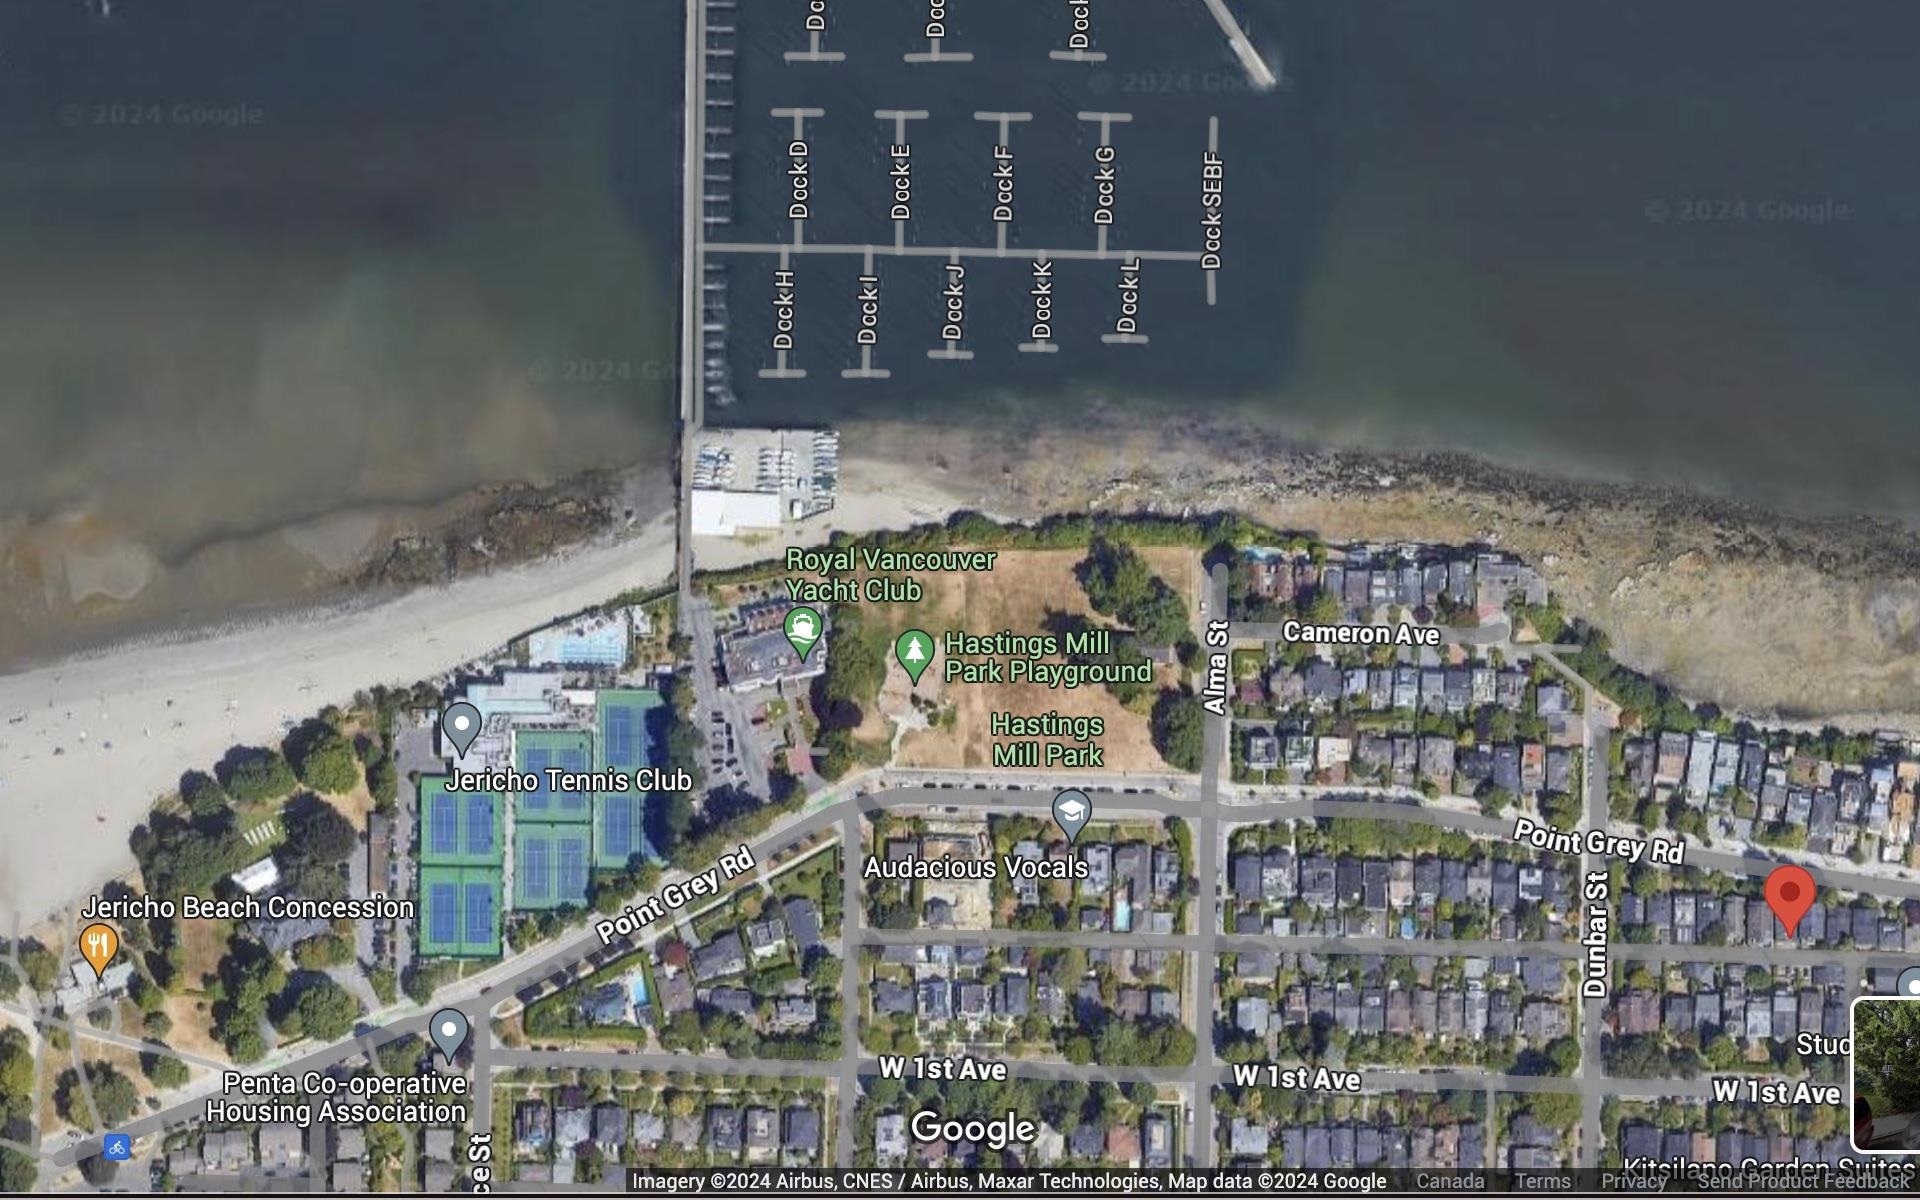 Along the Golden Mile, Close to Jericho Beach, the Tennis Club & the Yacht Club in Point Grey